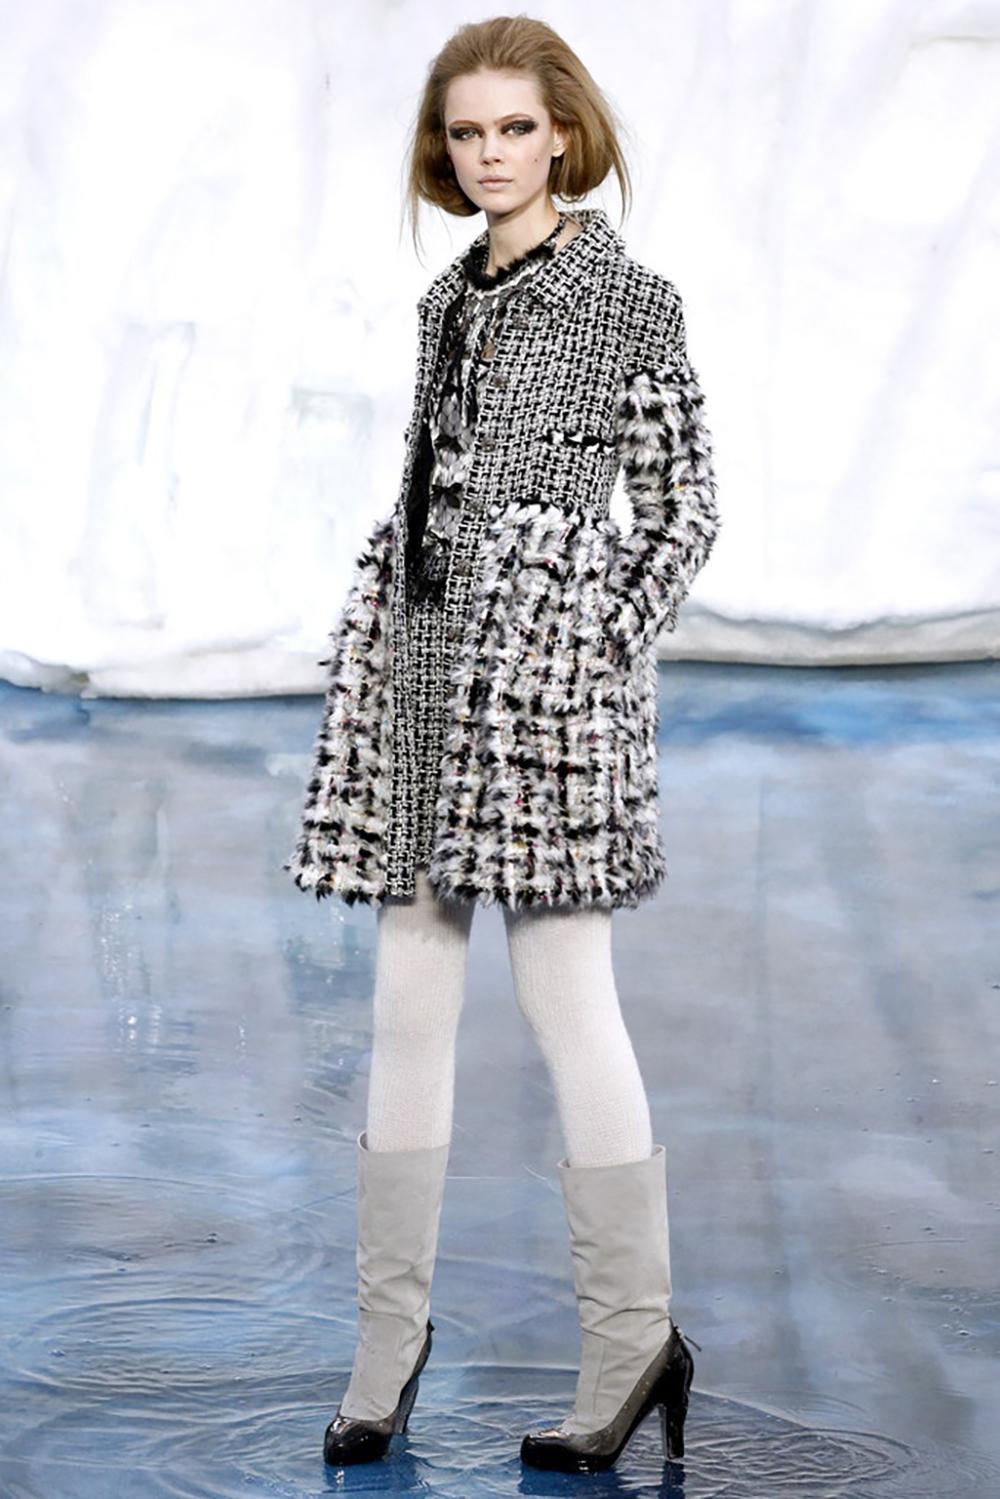 Super rare, collectors Chanel fluffly fantasy tweed coat from ARCTIC ICE Collection by Mr Karl Lagerfeld. Retail price was ca. 12,000$
Size mark 40 fr. Condition is pristine. 
- CC logo jewel Gripoix buttons
- faux-fur like fatasy tweed bottom part: